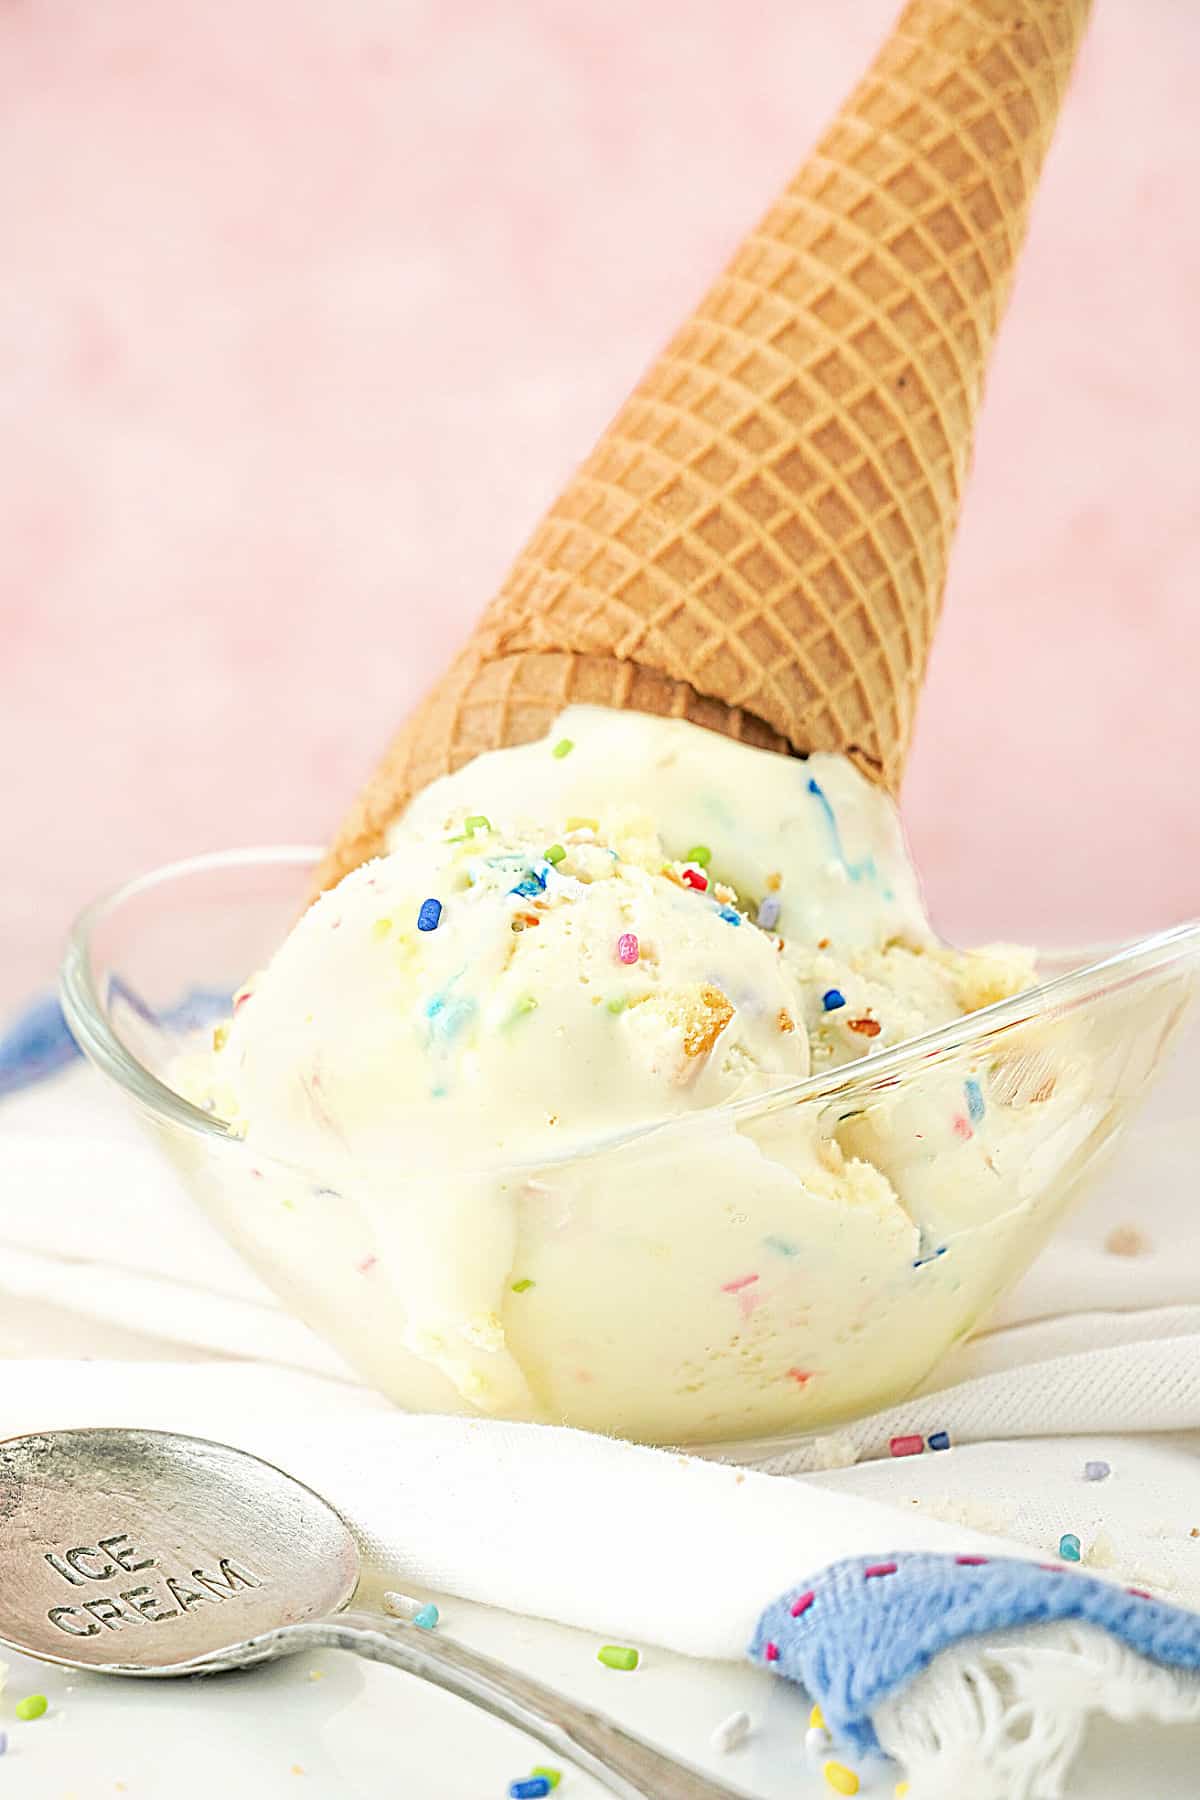 Glass bowl with funfetti ice cream scoops and a waffle cone. Pink background, white cloth, vintage spoon. 